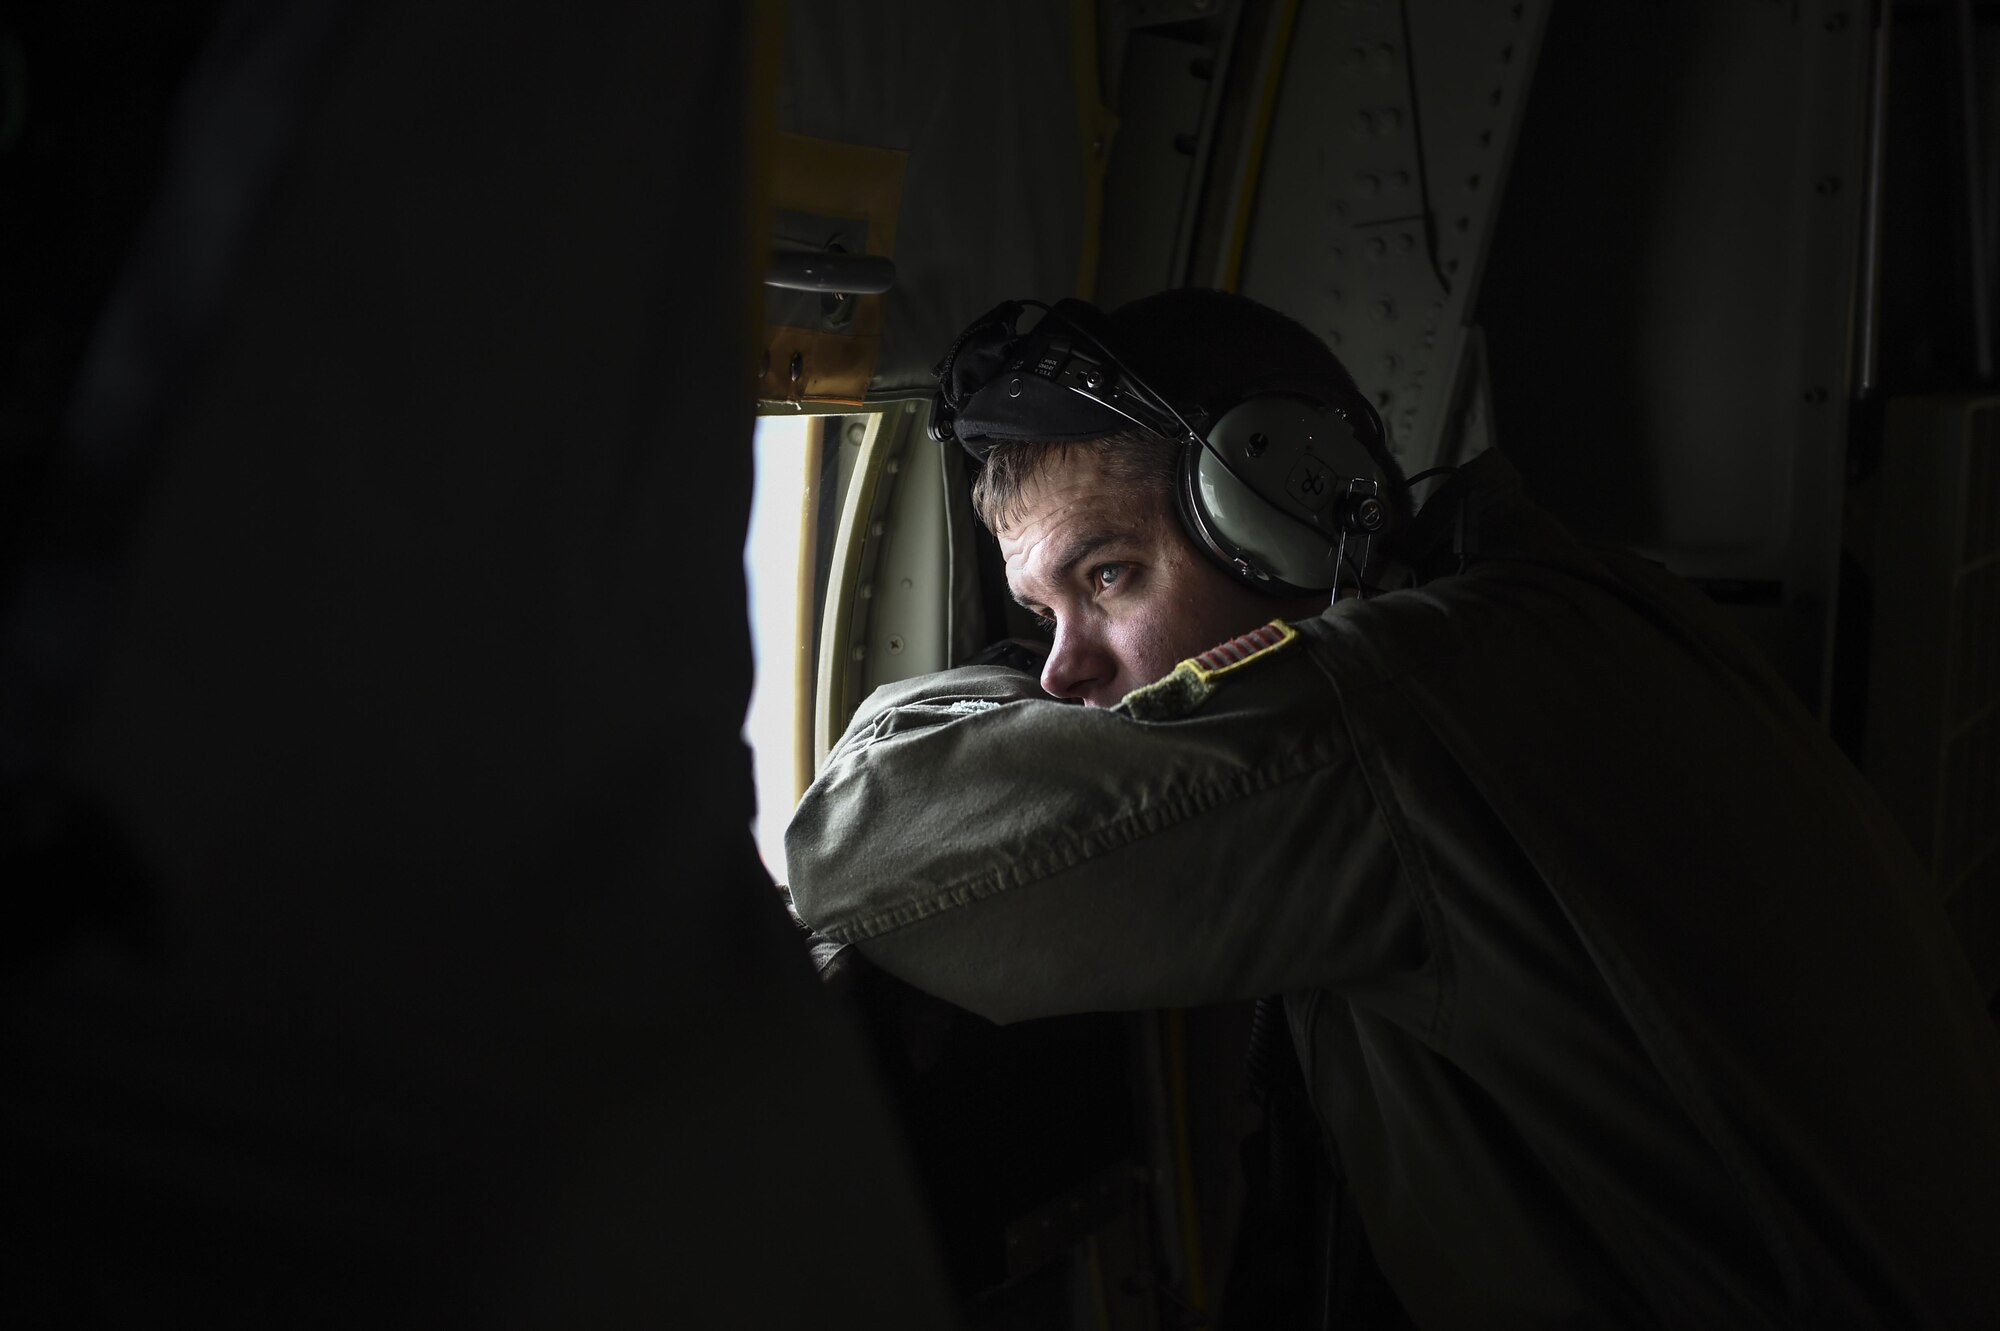 Staff Sgt. Johnny Hooker Jr., a special missions aviator with the 1st Special Operations Group Detachment 2, looks out of the door window of an MC-130J Commando II during a flight to Hurlburt Field, Fla., Dec. 11, 2015. The MC-130J will undergo modifications to become an AC-130J Ghostrider, which will provide the 1 SOW with close air support and air interdiction capabilities. (U.S. Air Force photo by Senior Airman Ryan Conroy)